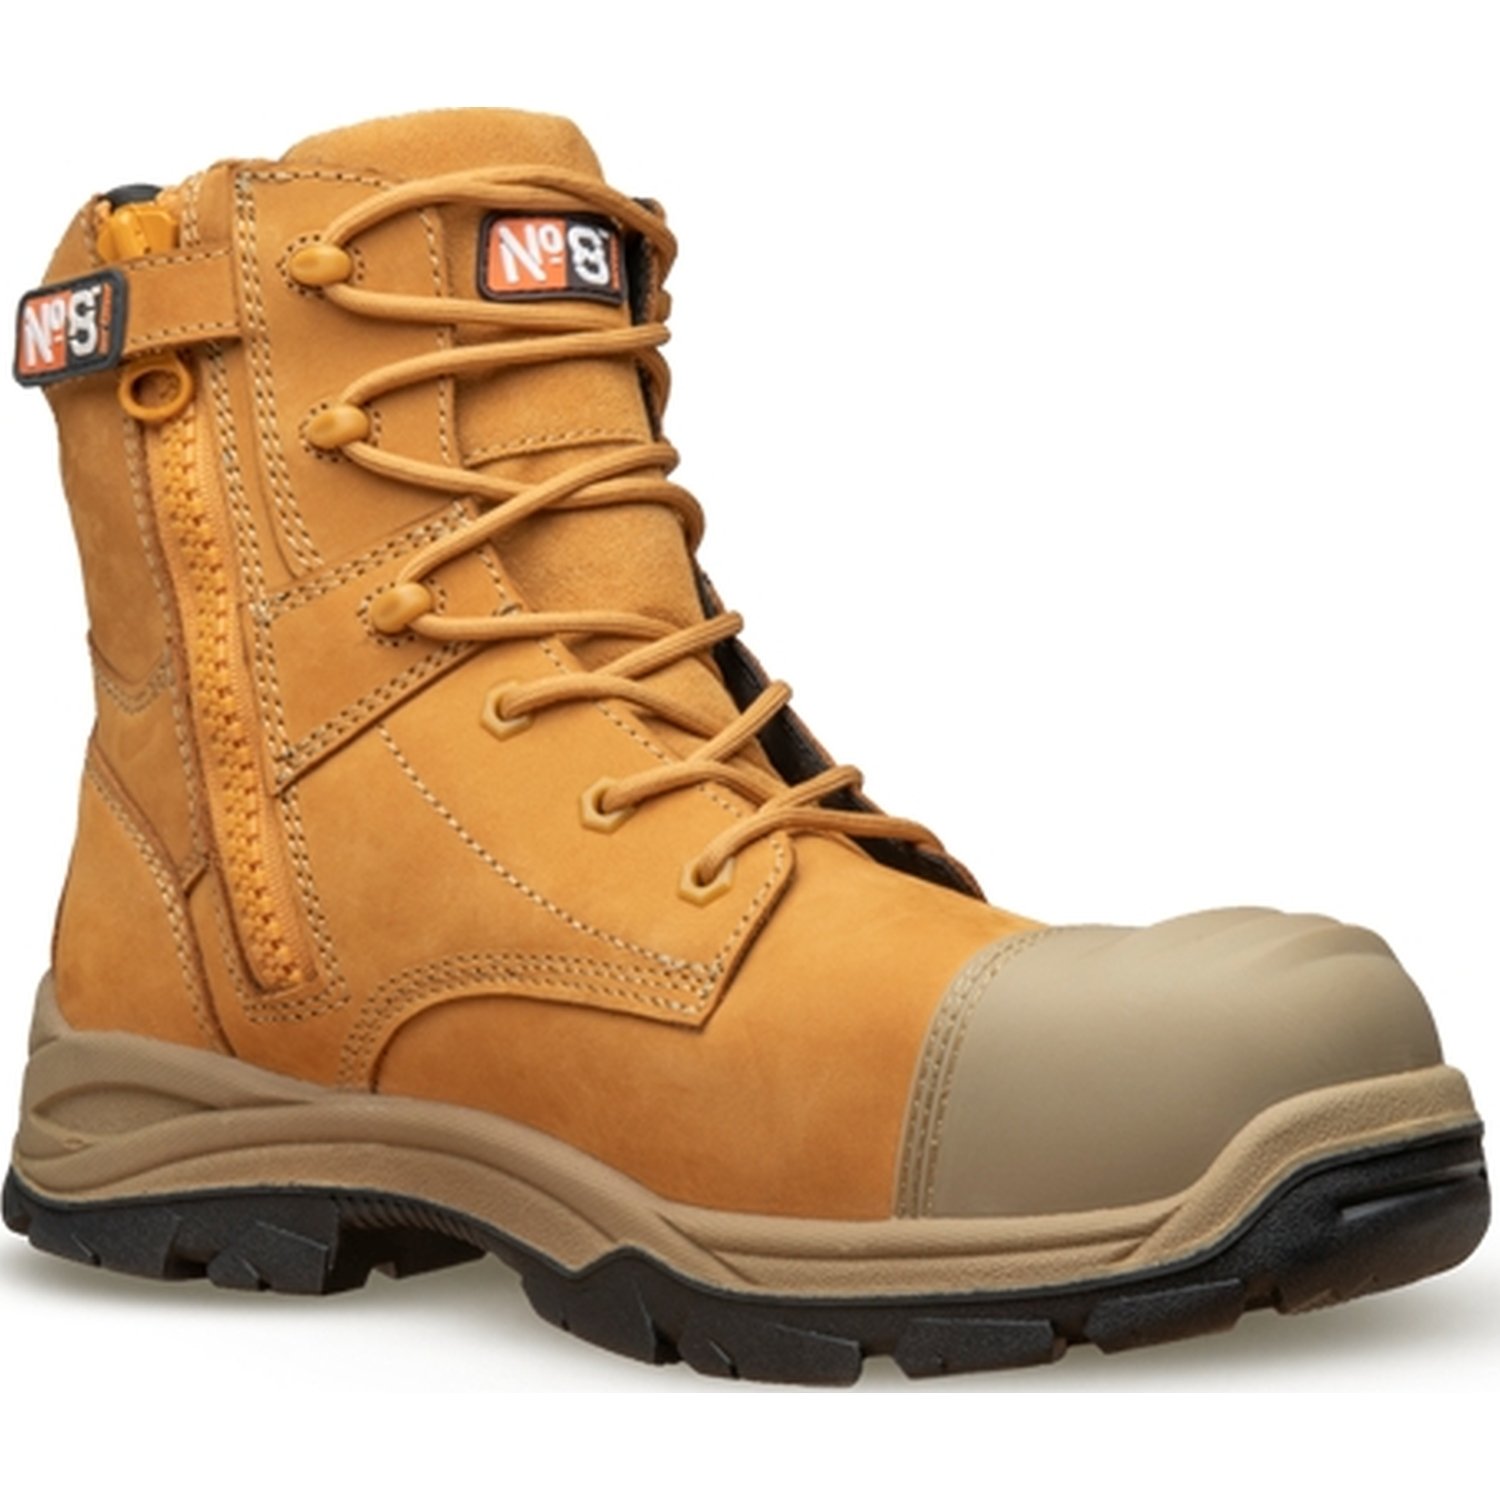 Apex Goldie Wide Fit Lace Up/Zip W/Proof EH Safety Boot